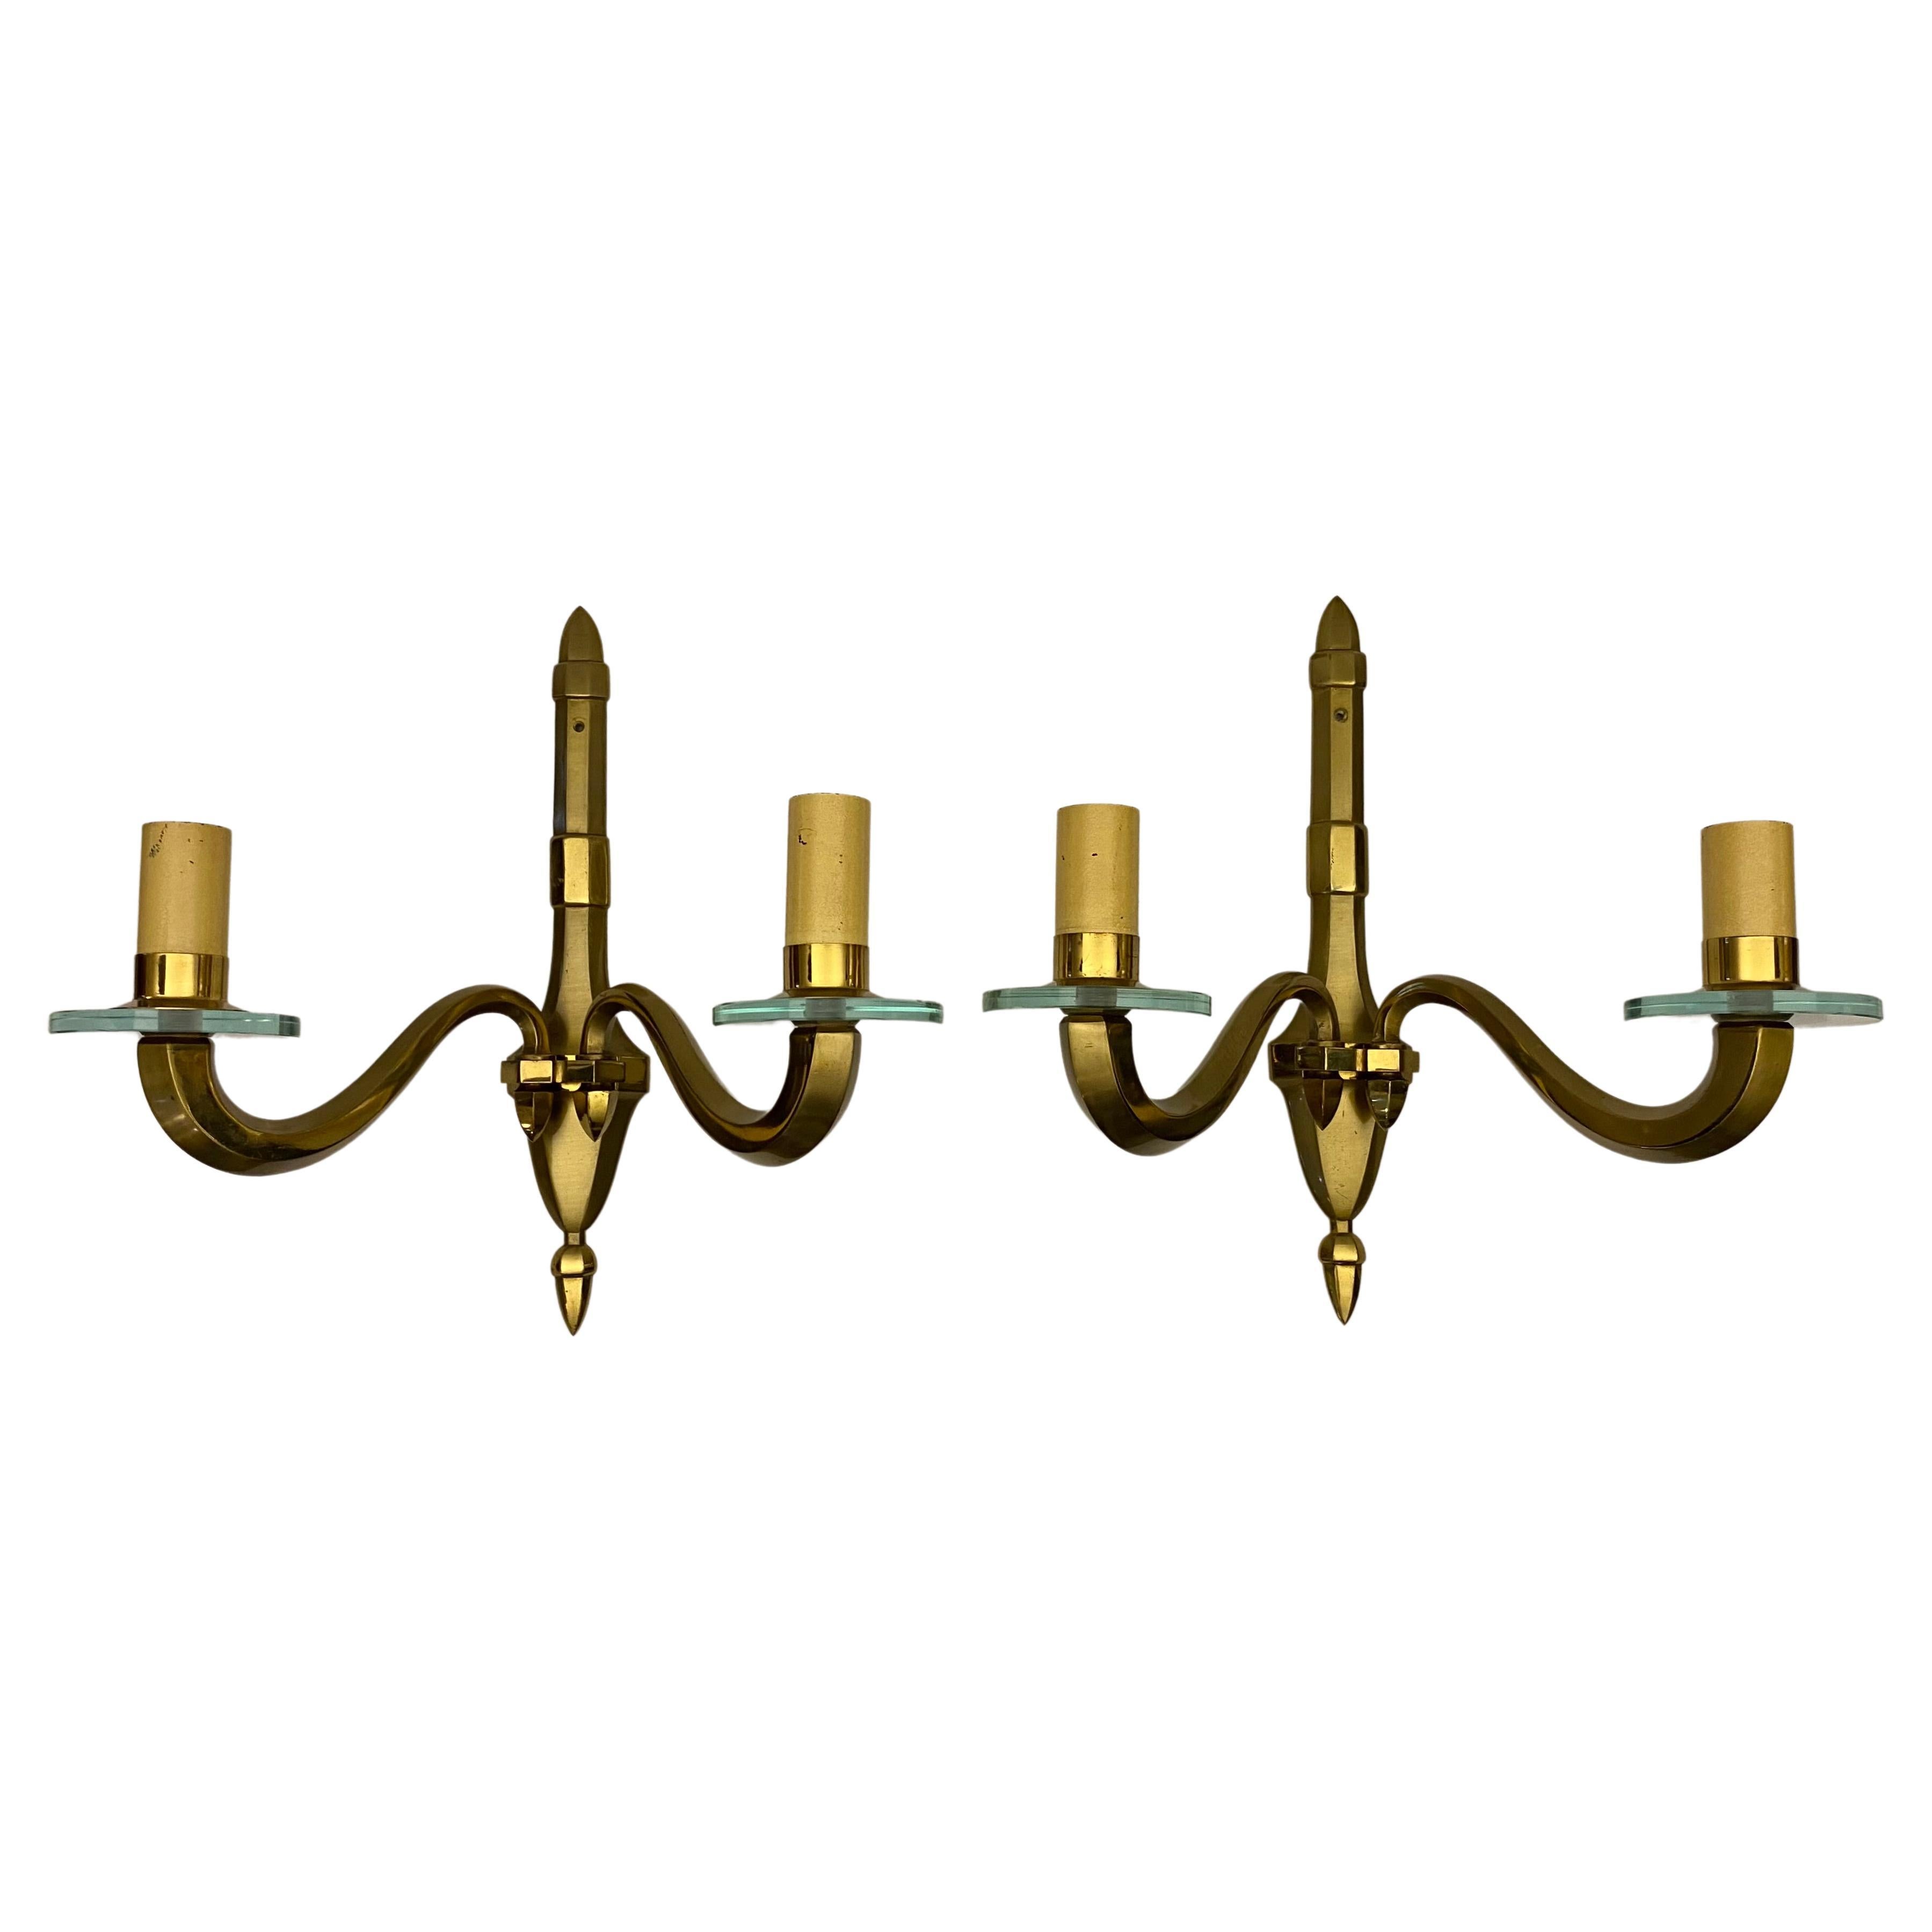 Pair of French Mid-Century Bronze Wall Sconces in the manner of Jean Perzel